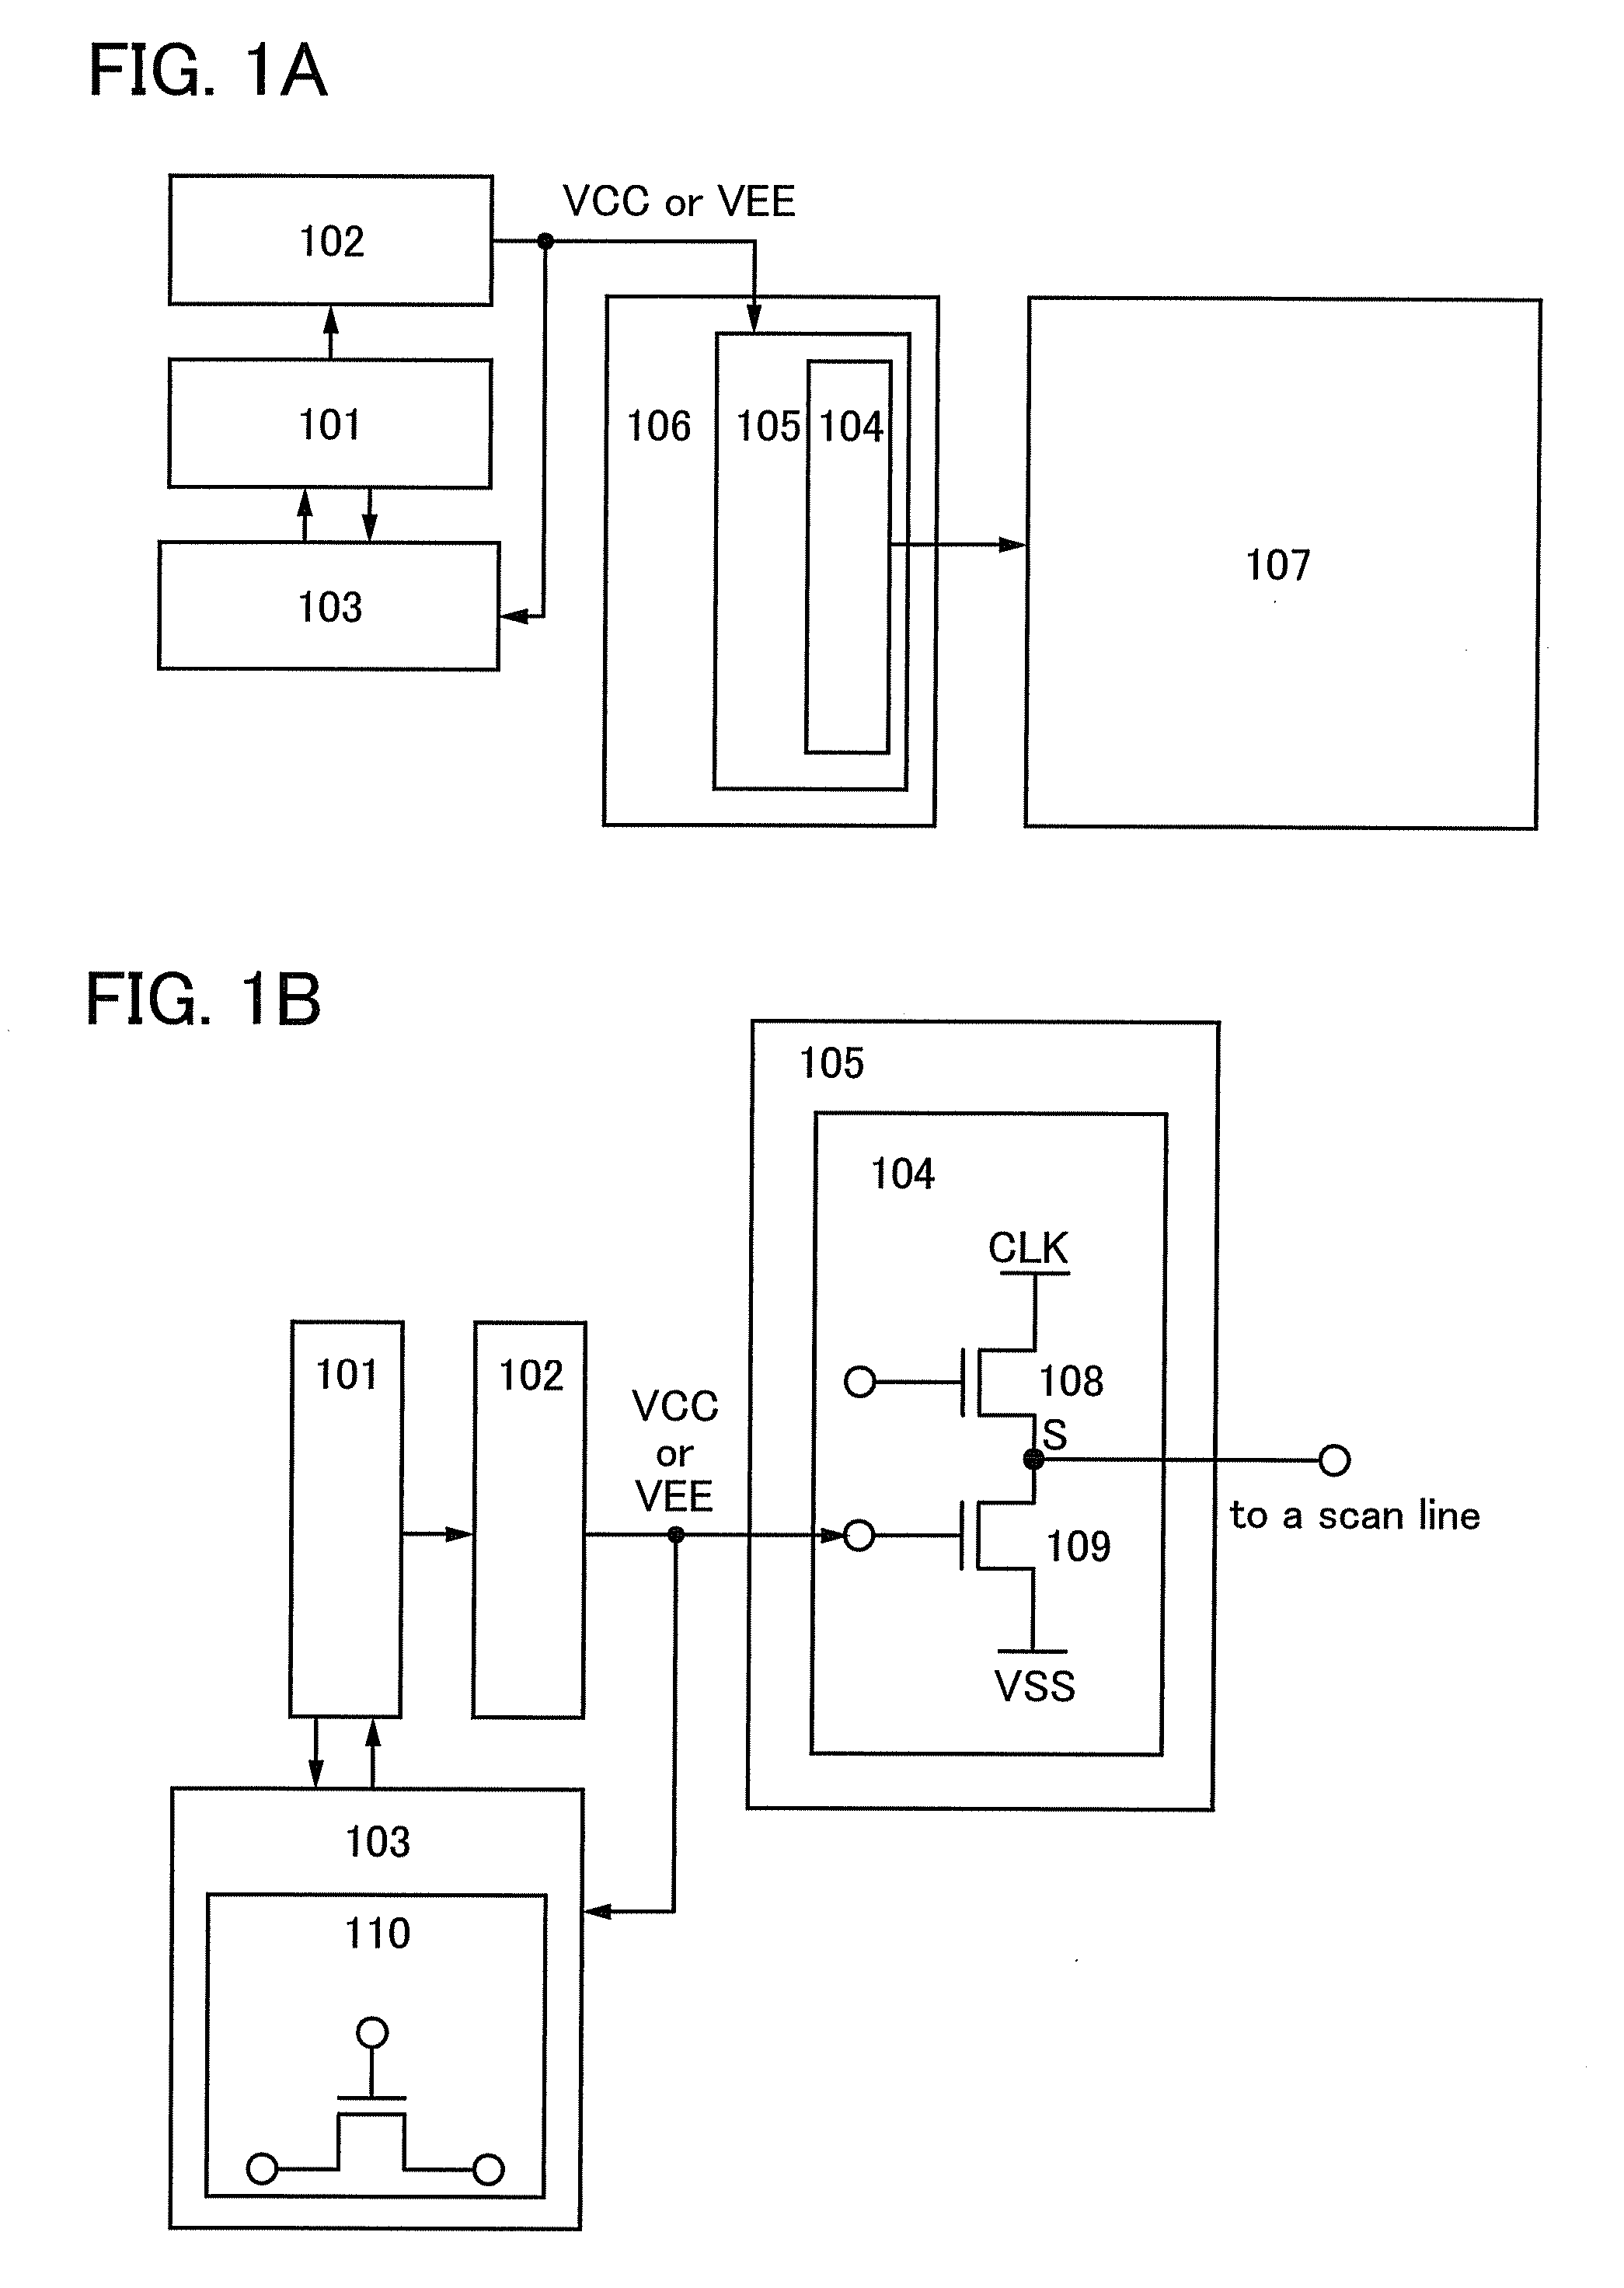 Display device including driver circuit and monitor circuit